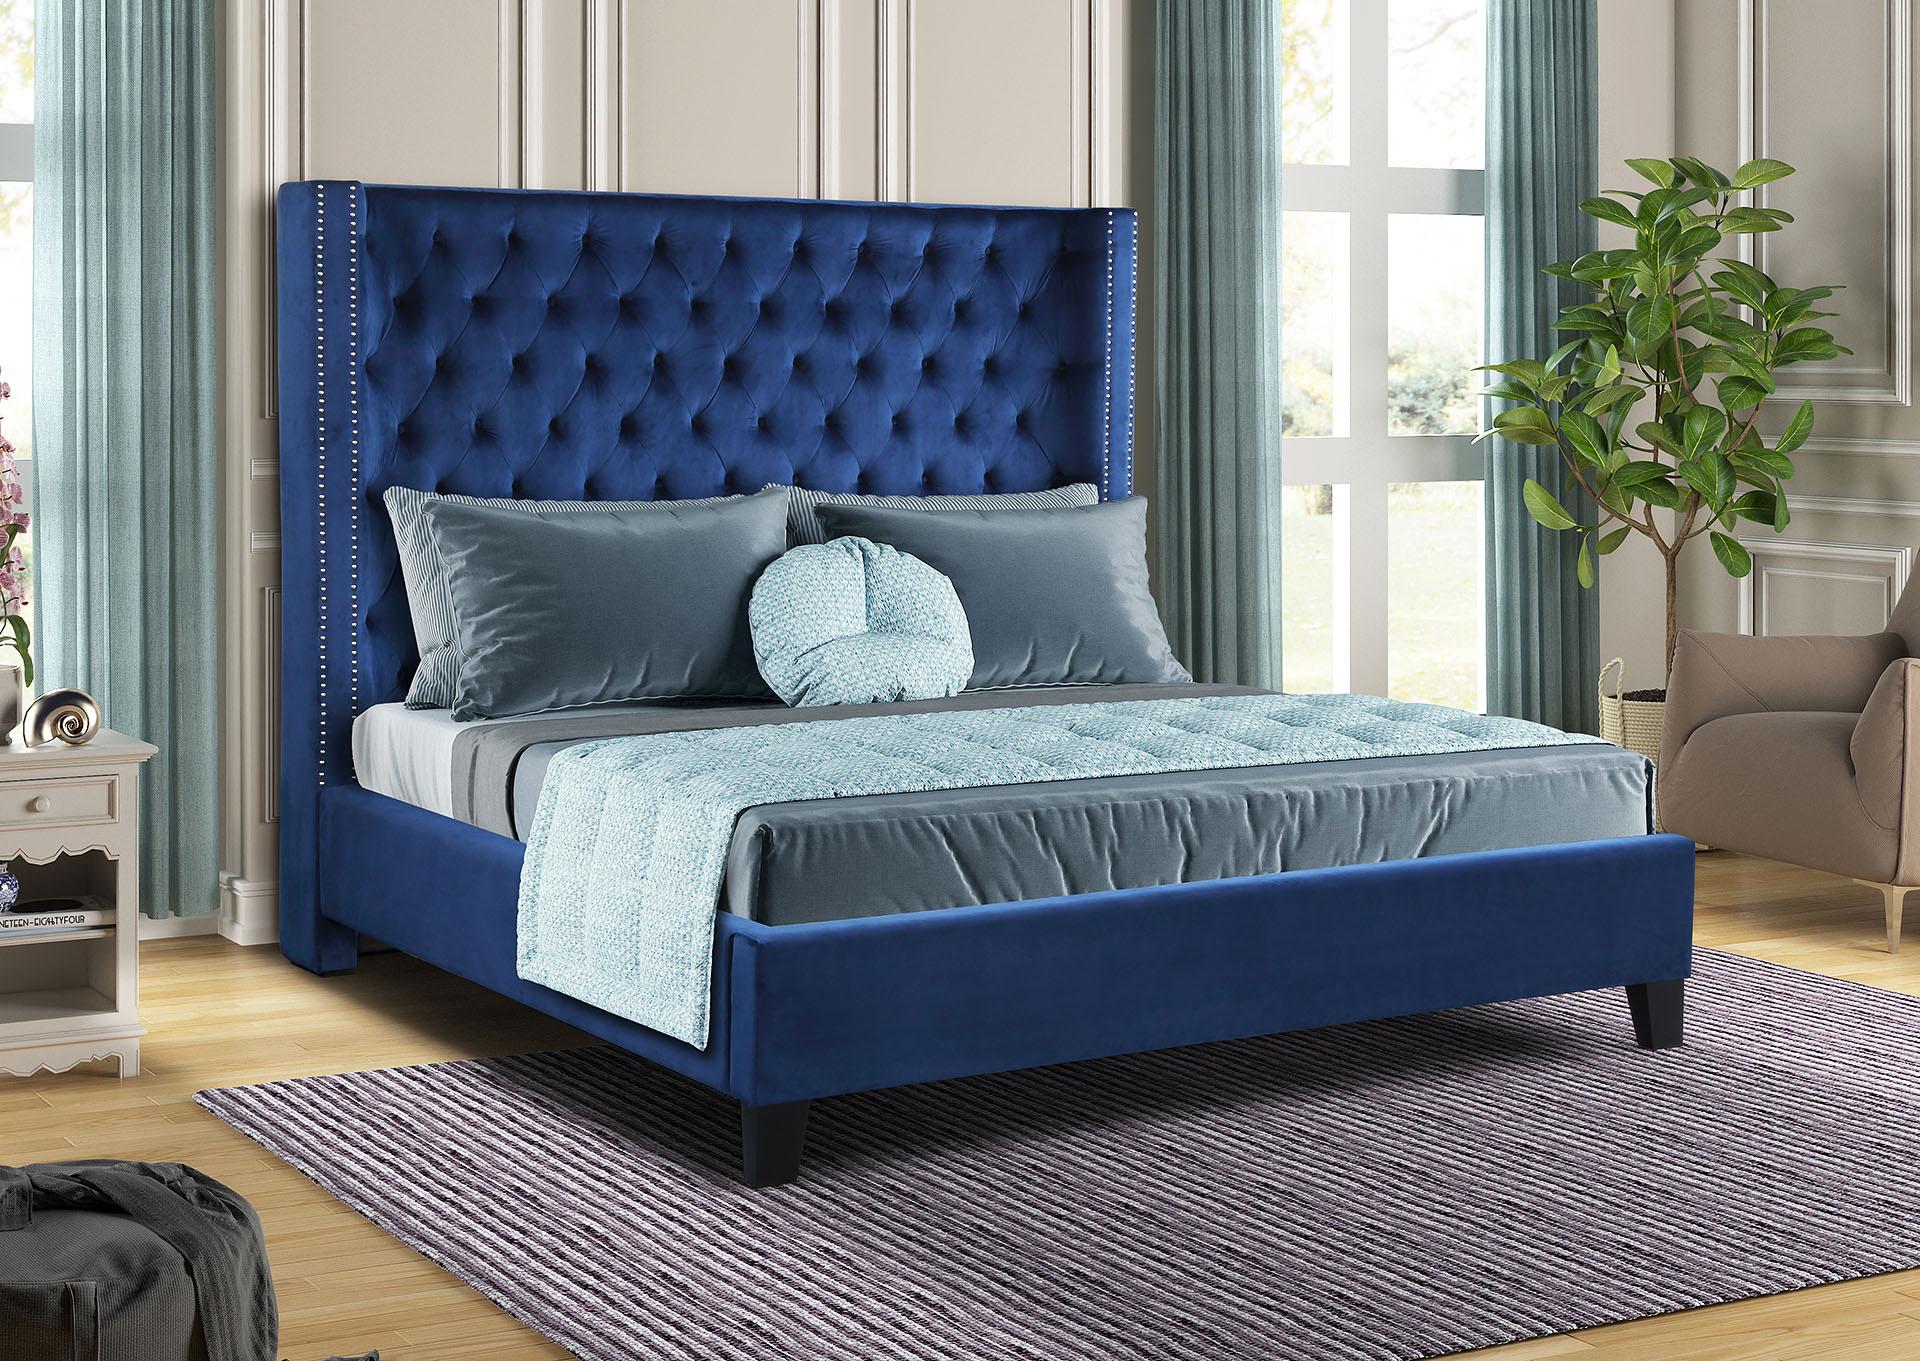 Contemporary, Modern Panel Bed ALLEN GHF-808857599964 in Blue Fabric